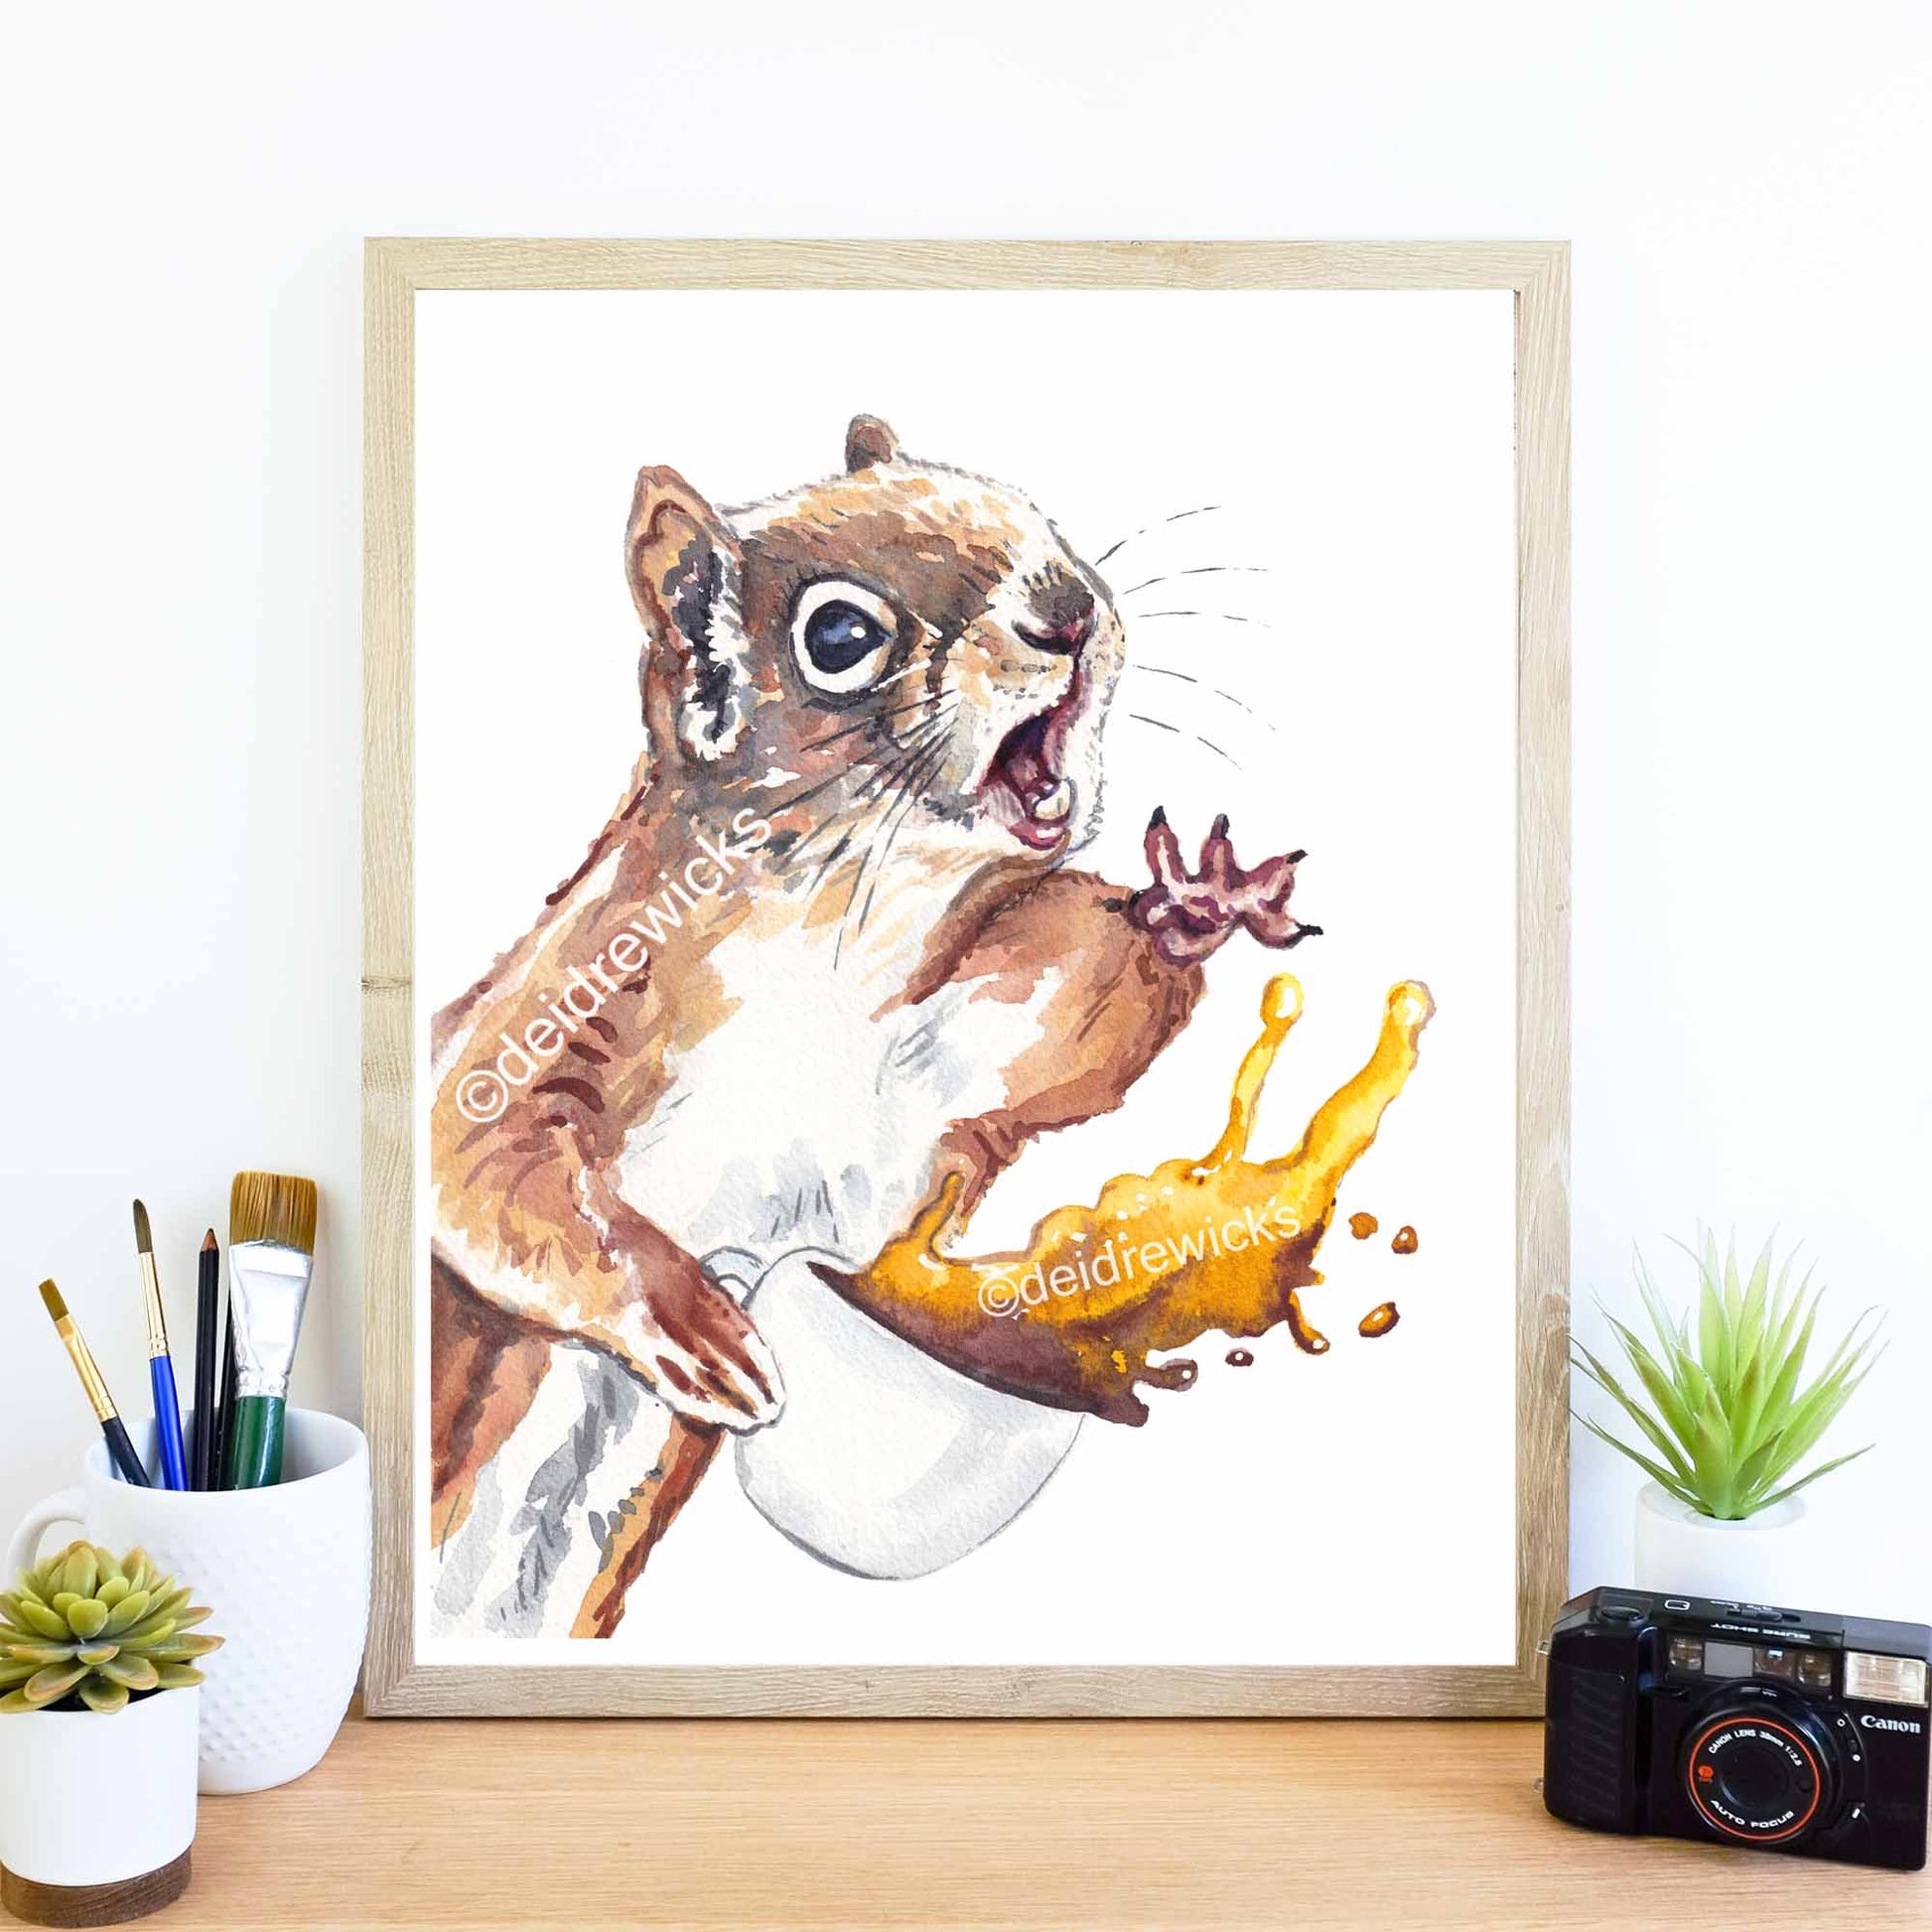 Framed example of a coffee squirrel watercolour painting by Deidre Wicks